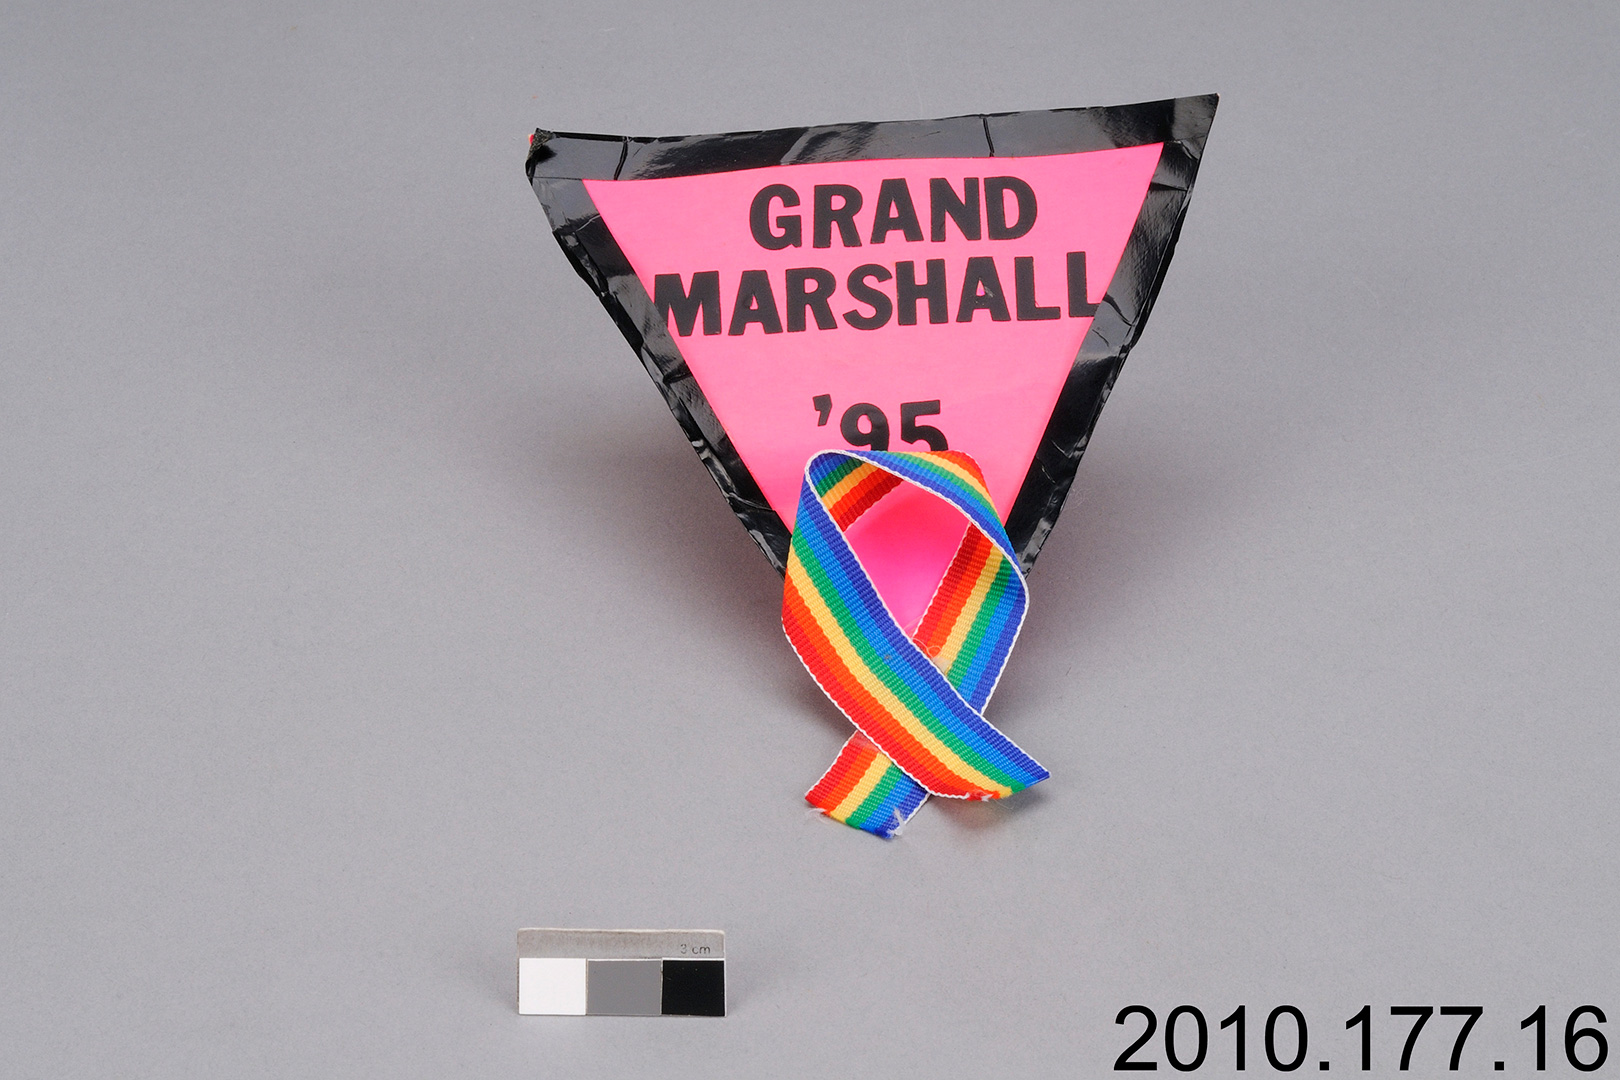 Une épinglette triangulaire en tissu rose avec un ruban arc-en-ciel en bas et les mots « Grand Marshall, “95 » A pink fabric triangle pin with a rainbow ribbon at the bottom, and the words “Grand Marshall, ’95.”